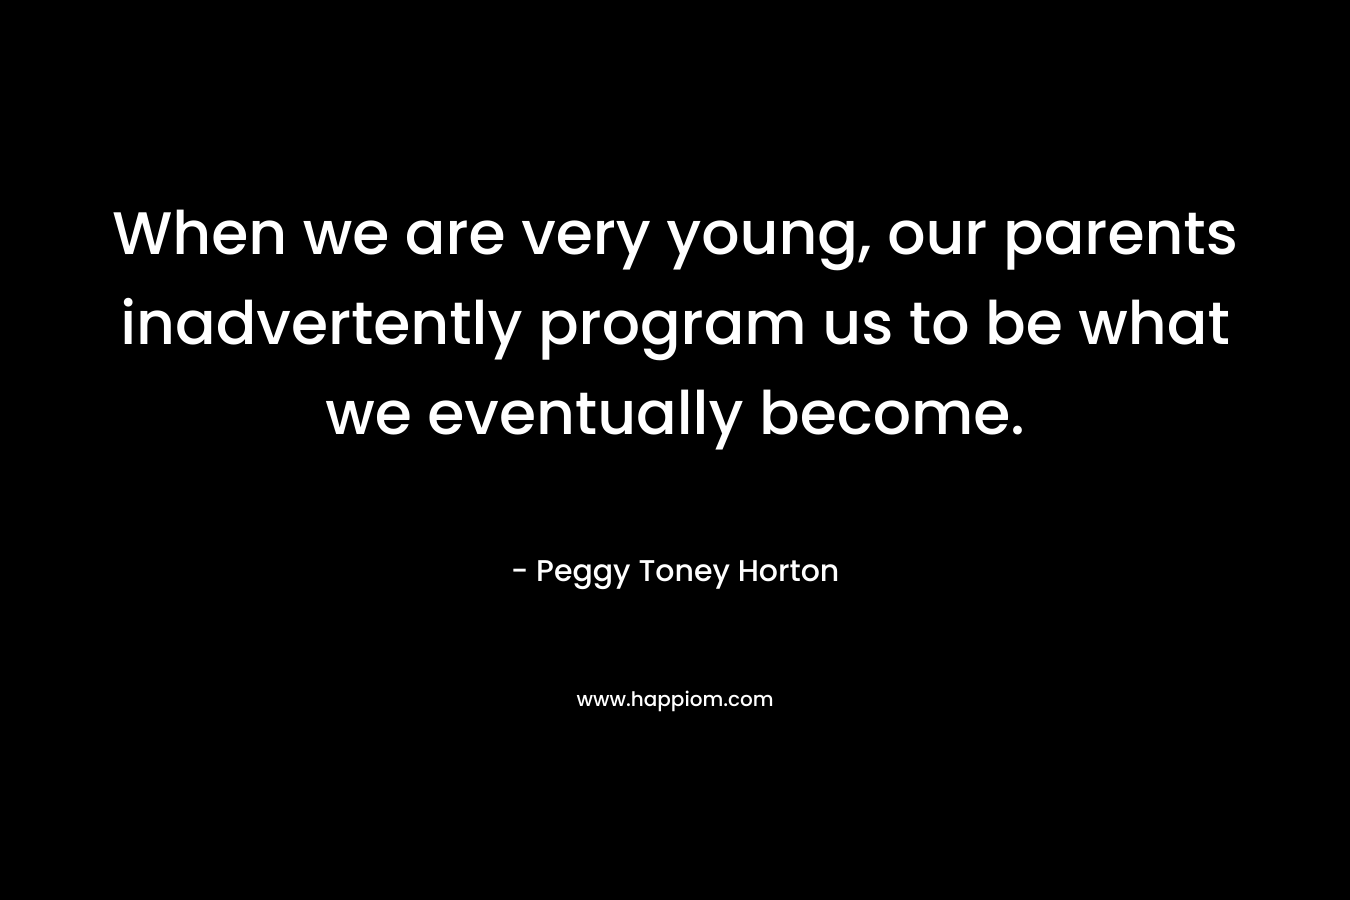 When we are very young, our parents inadvertently program us to be what we eventually become. – Peggy Toney Horton